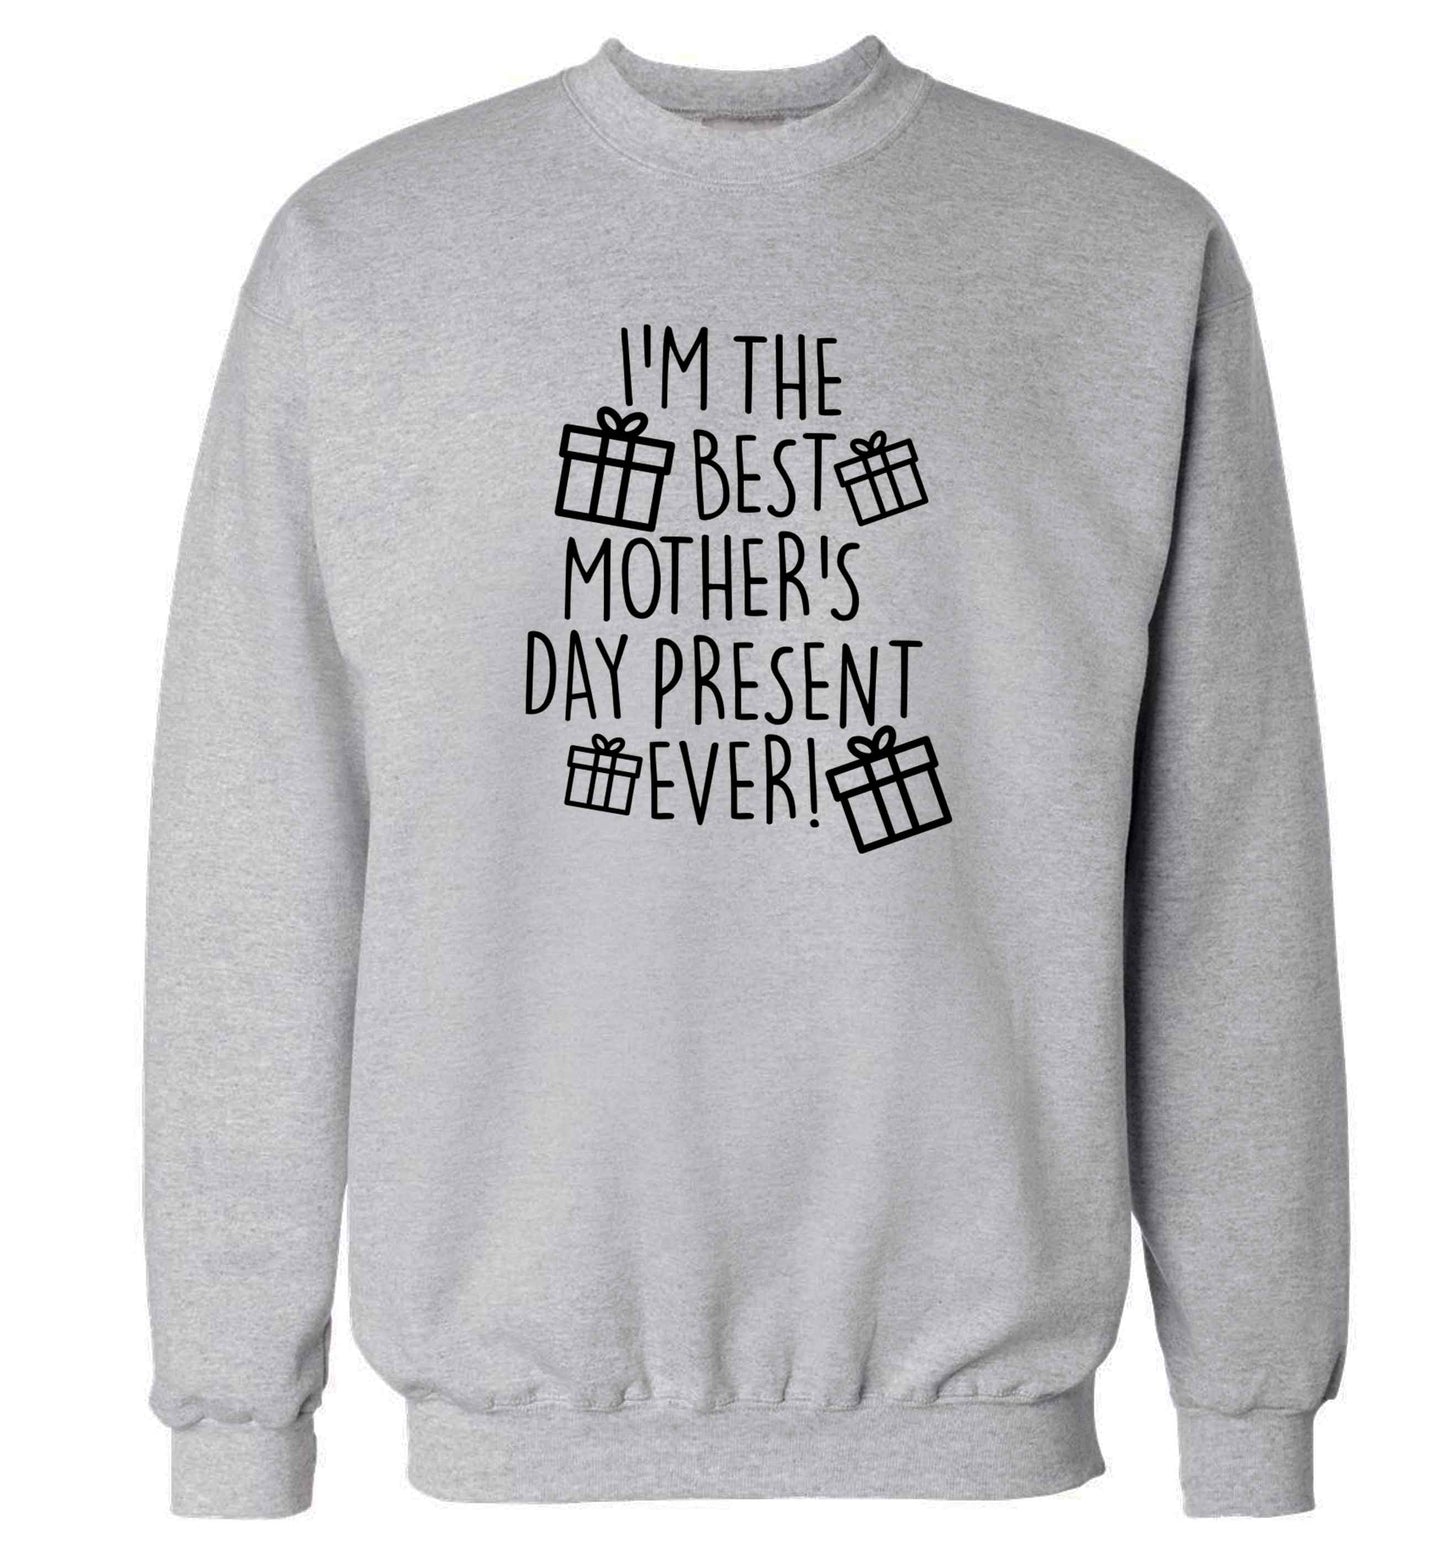 I'm the best mother's day present ever! adult's unisex grey sweater 2XL